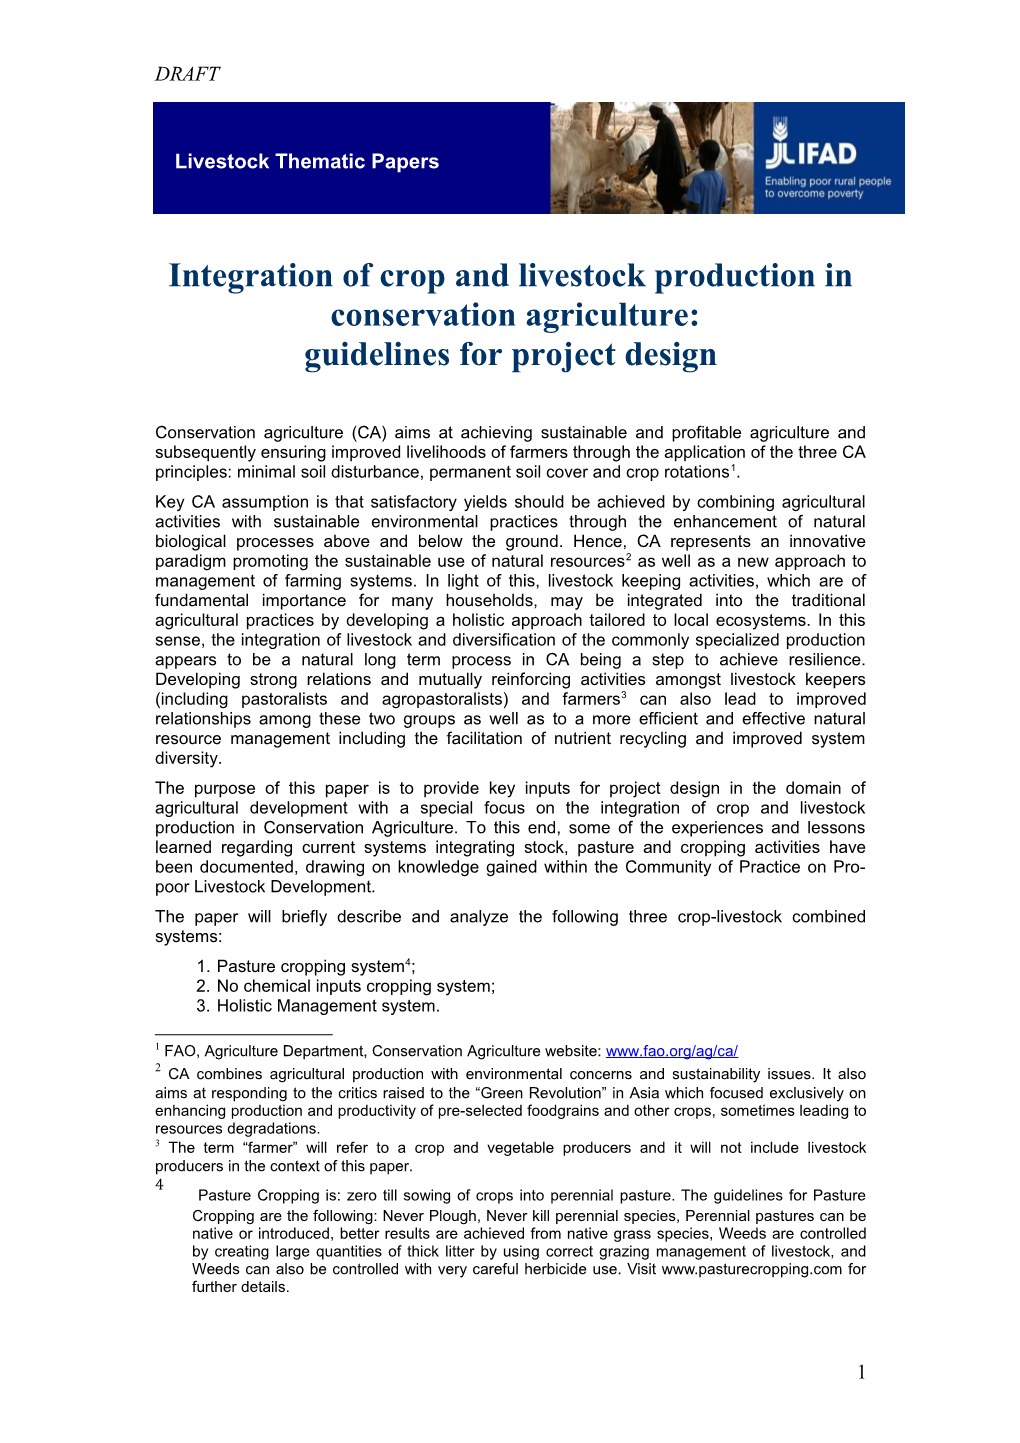 Integration of Crop and Livestock Production In